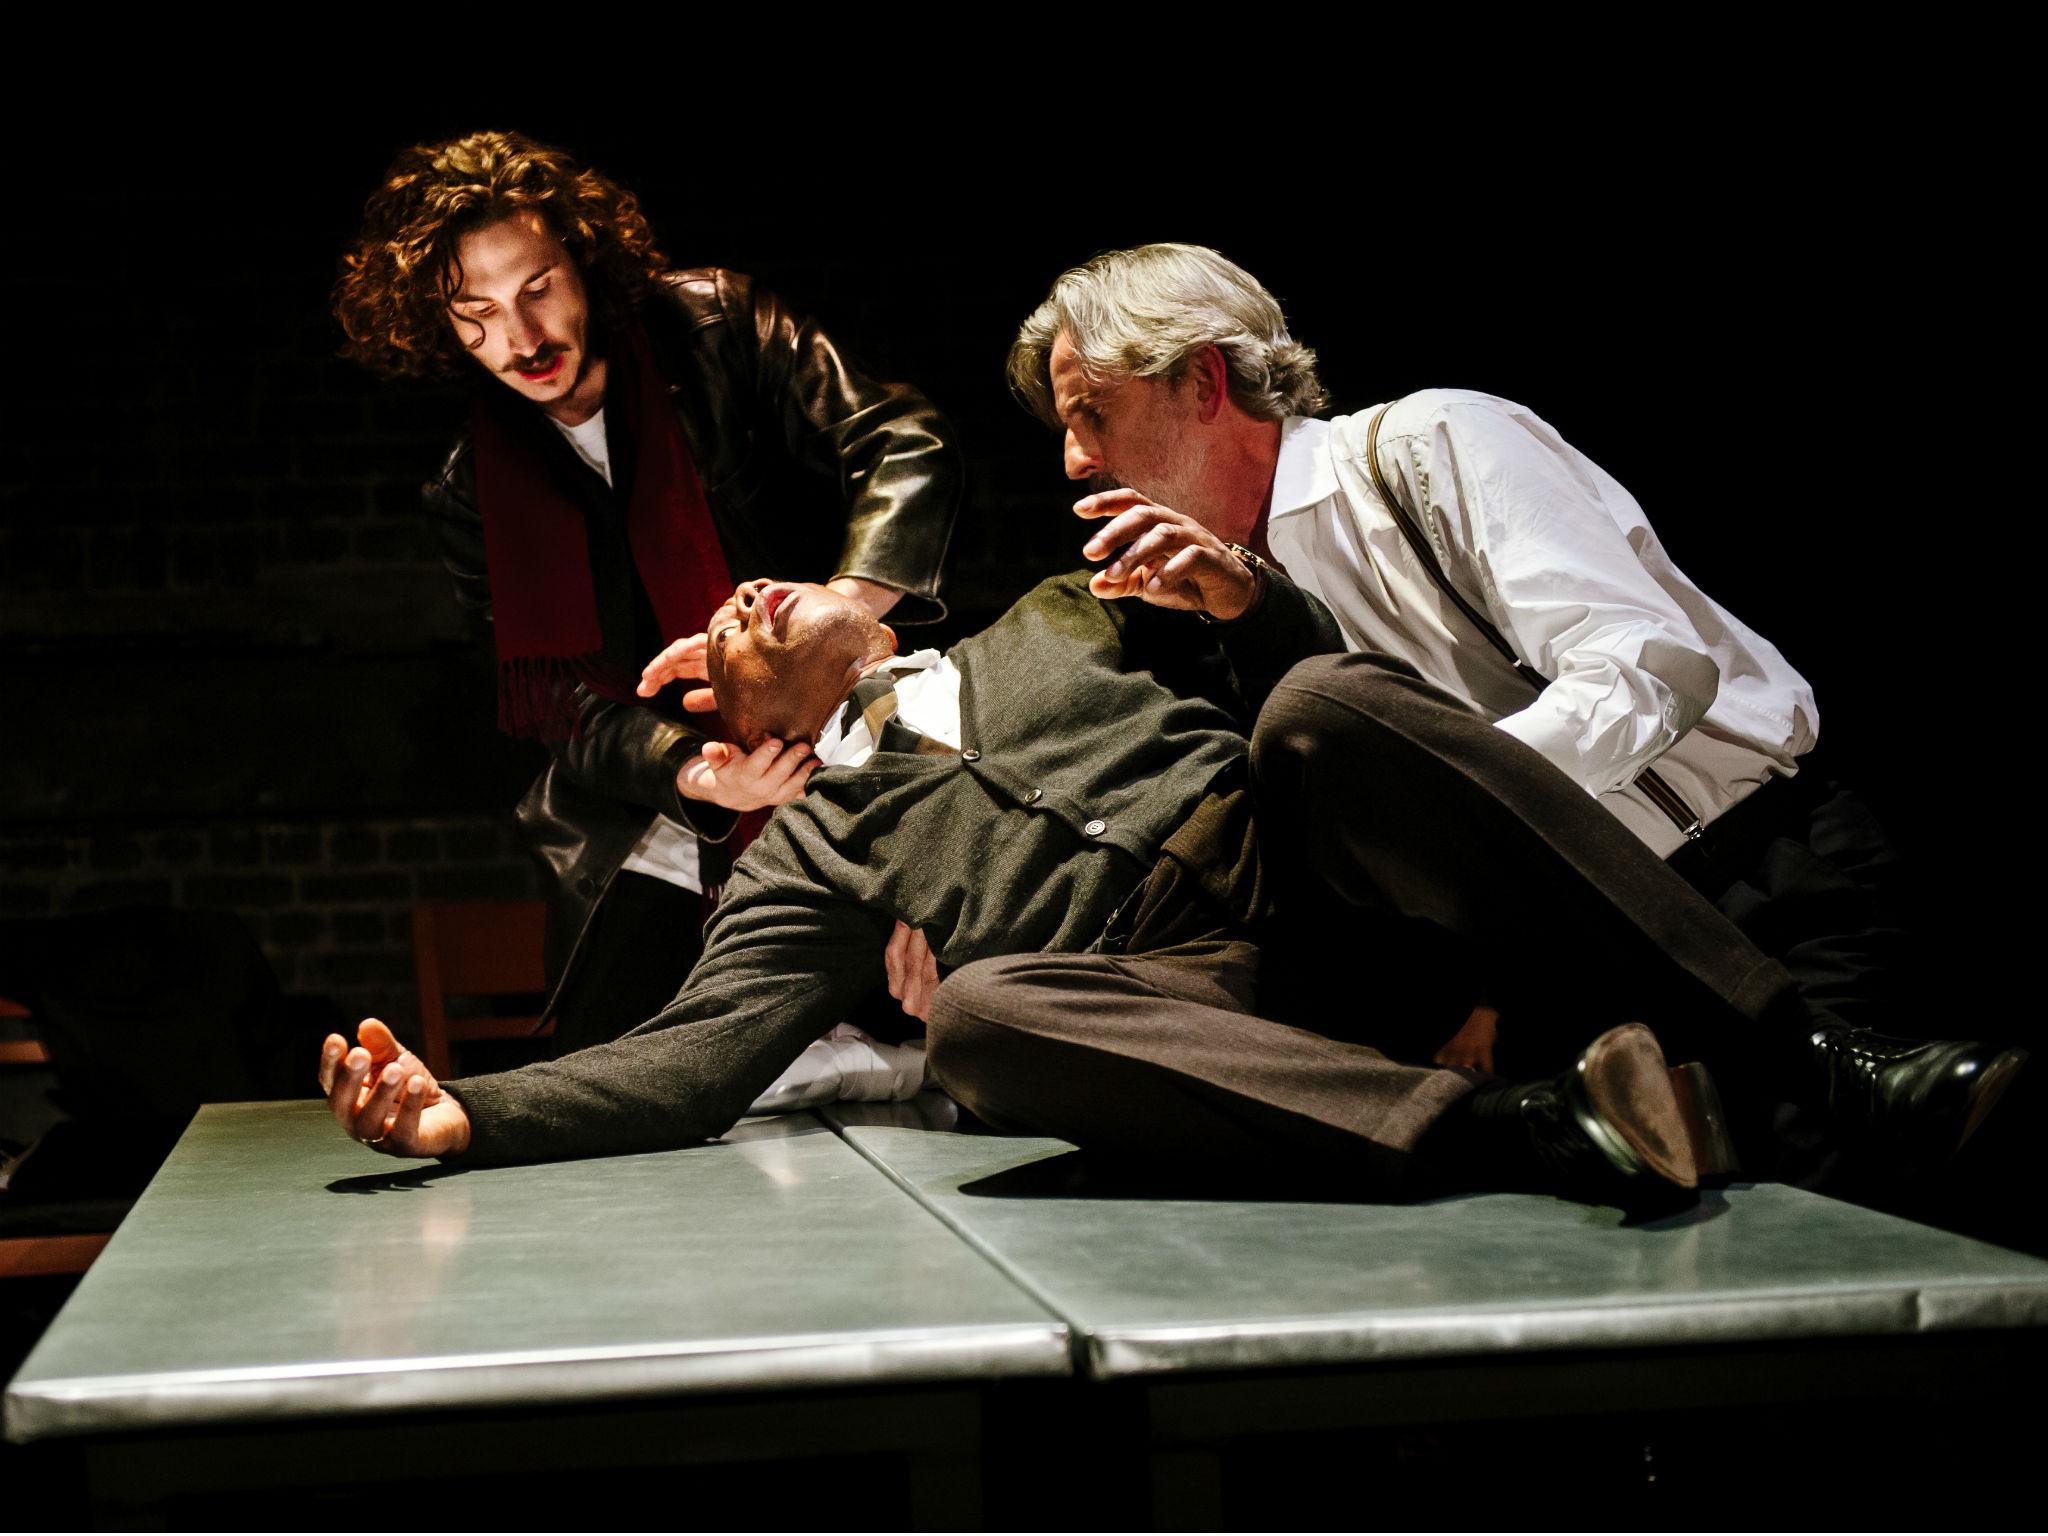 Billy Postlethwaite as Rambert, Burt Caesar as Grand and Martin Turner as Tarrou in 'The Plague' at the Arcola Theatre